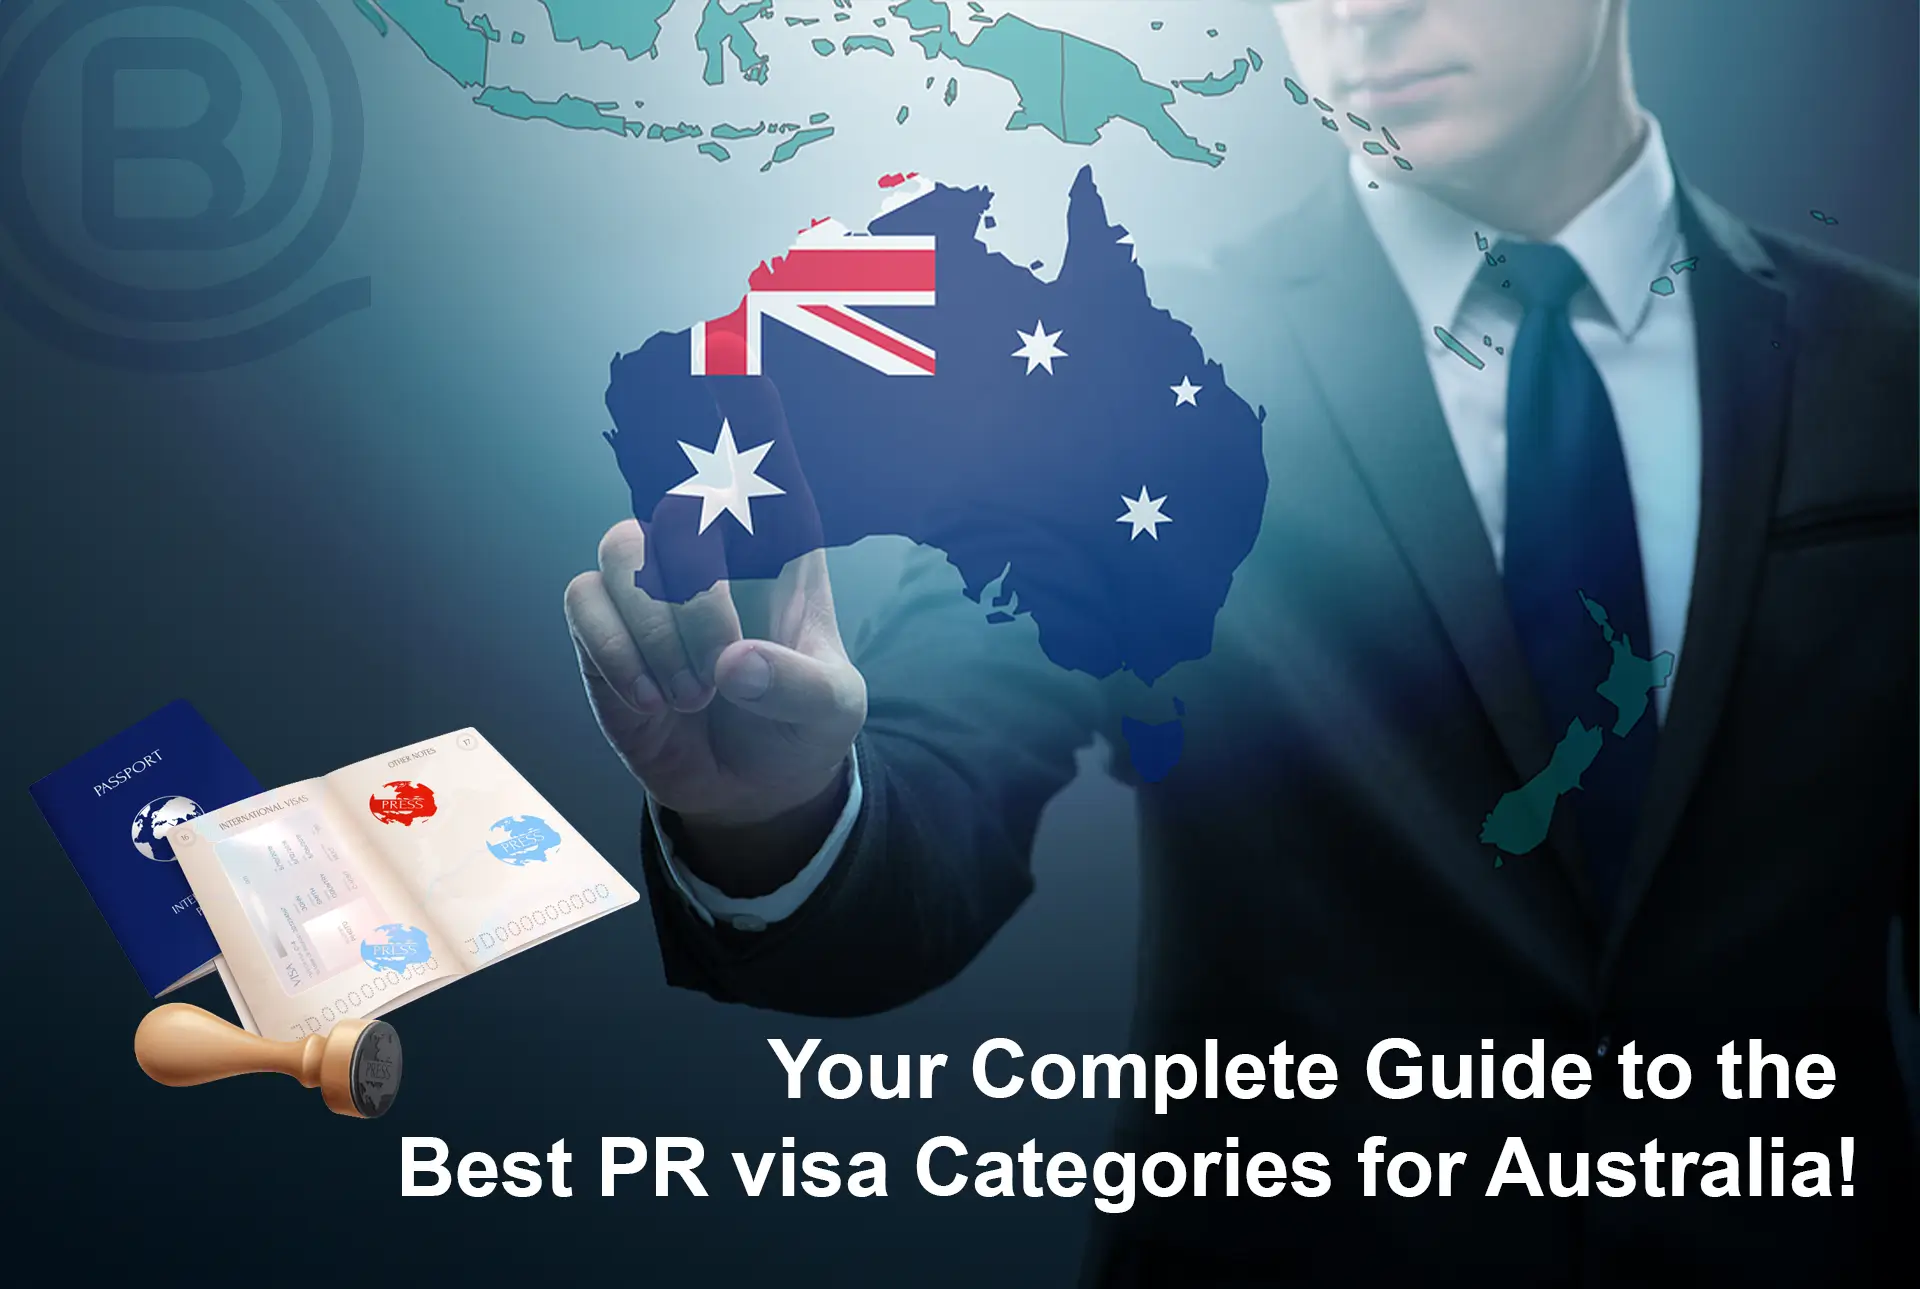 Your Complete Guide to the Best PR visa Categories for Australia